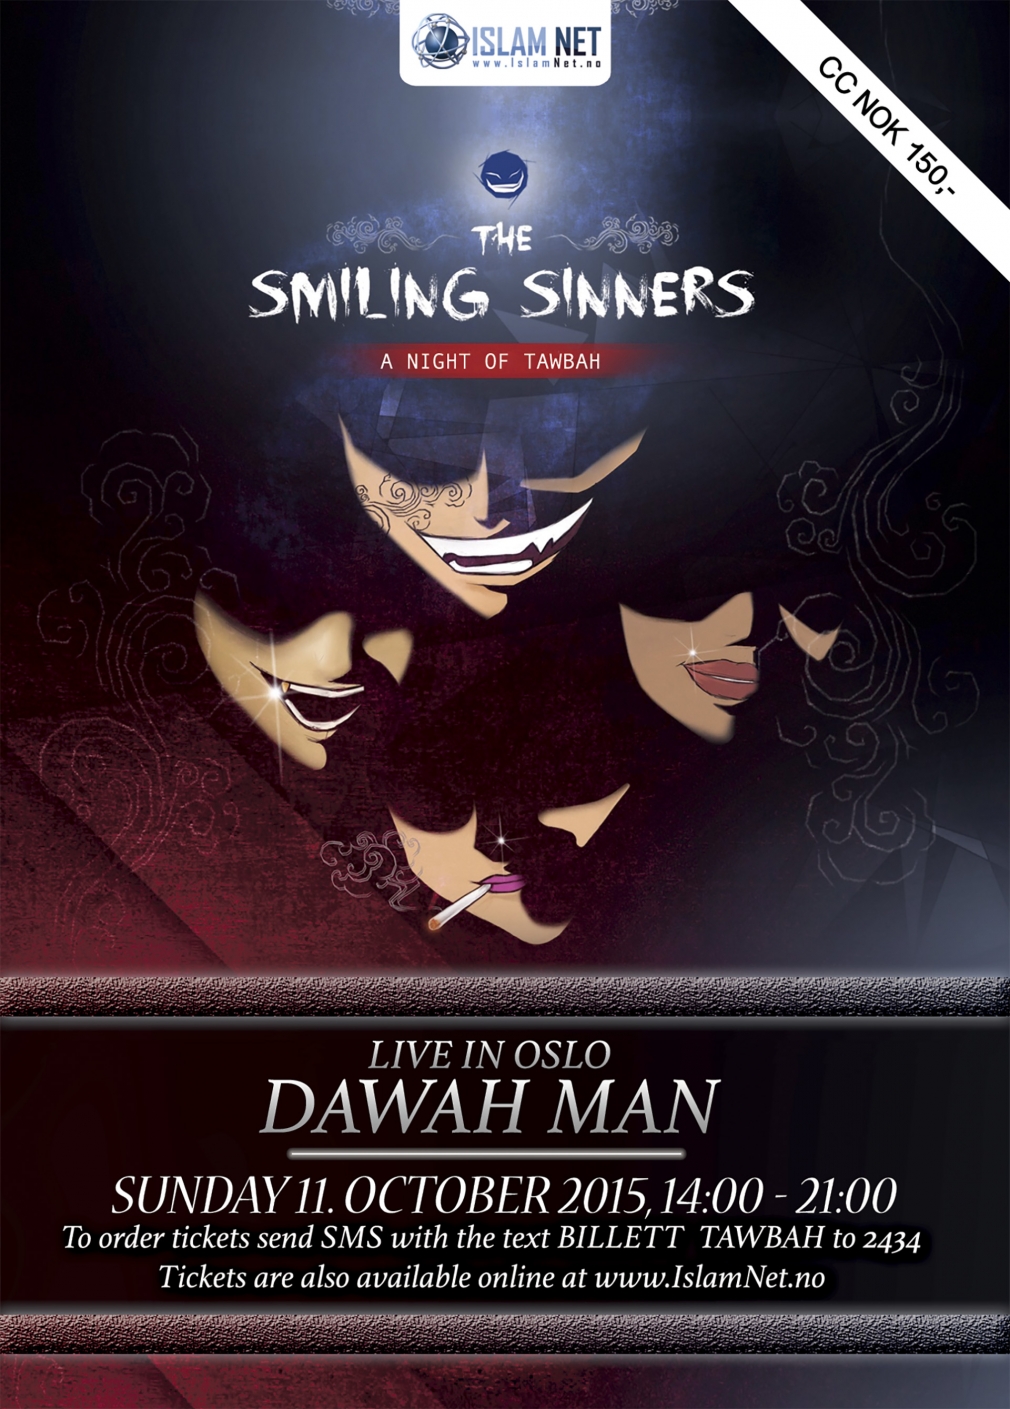 The Smiling Sinners – A Night of Tawbah